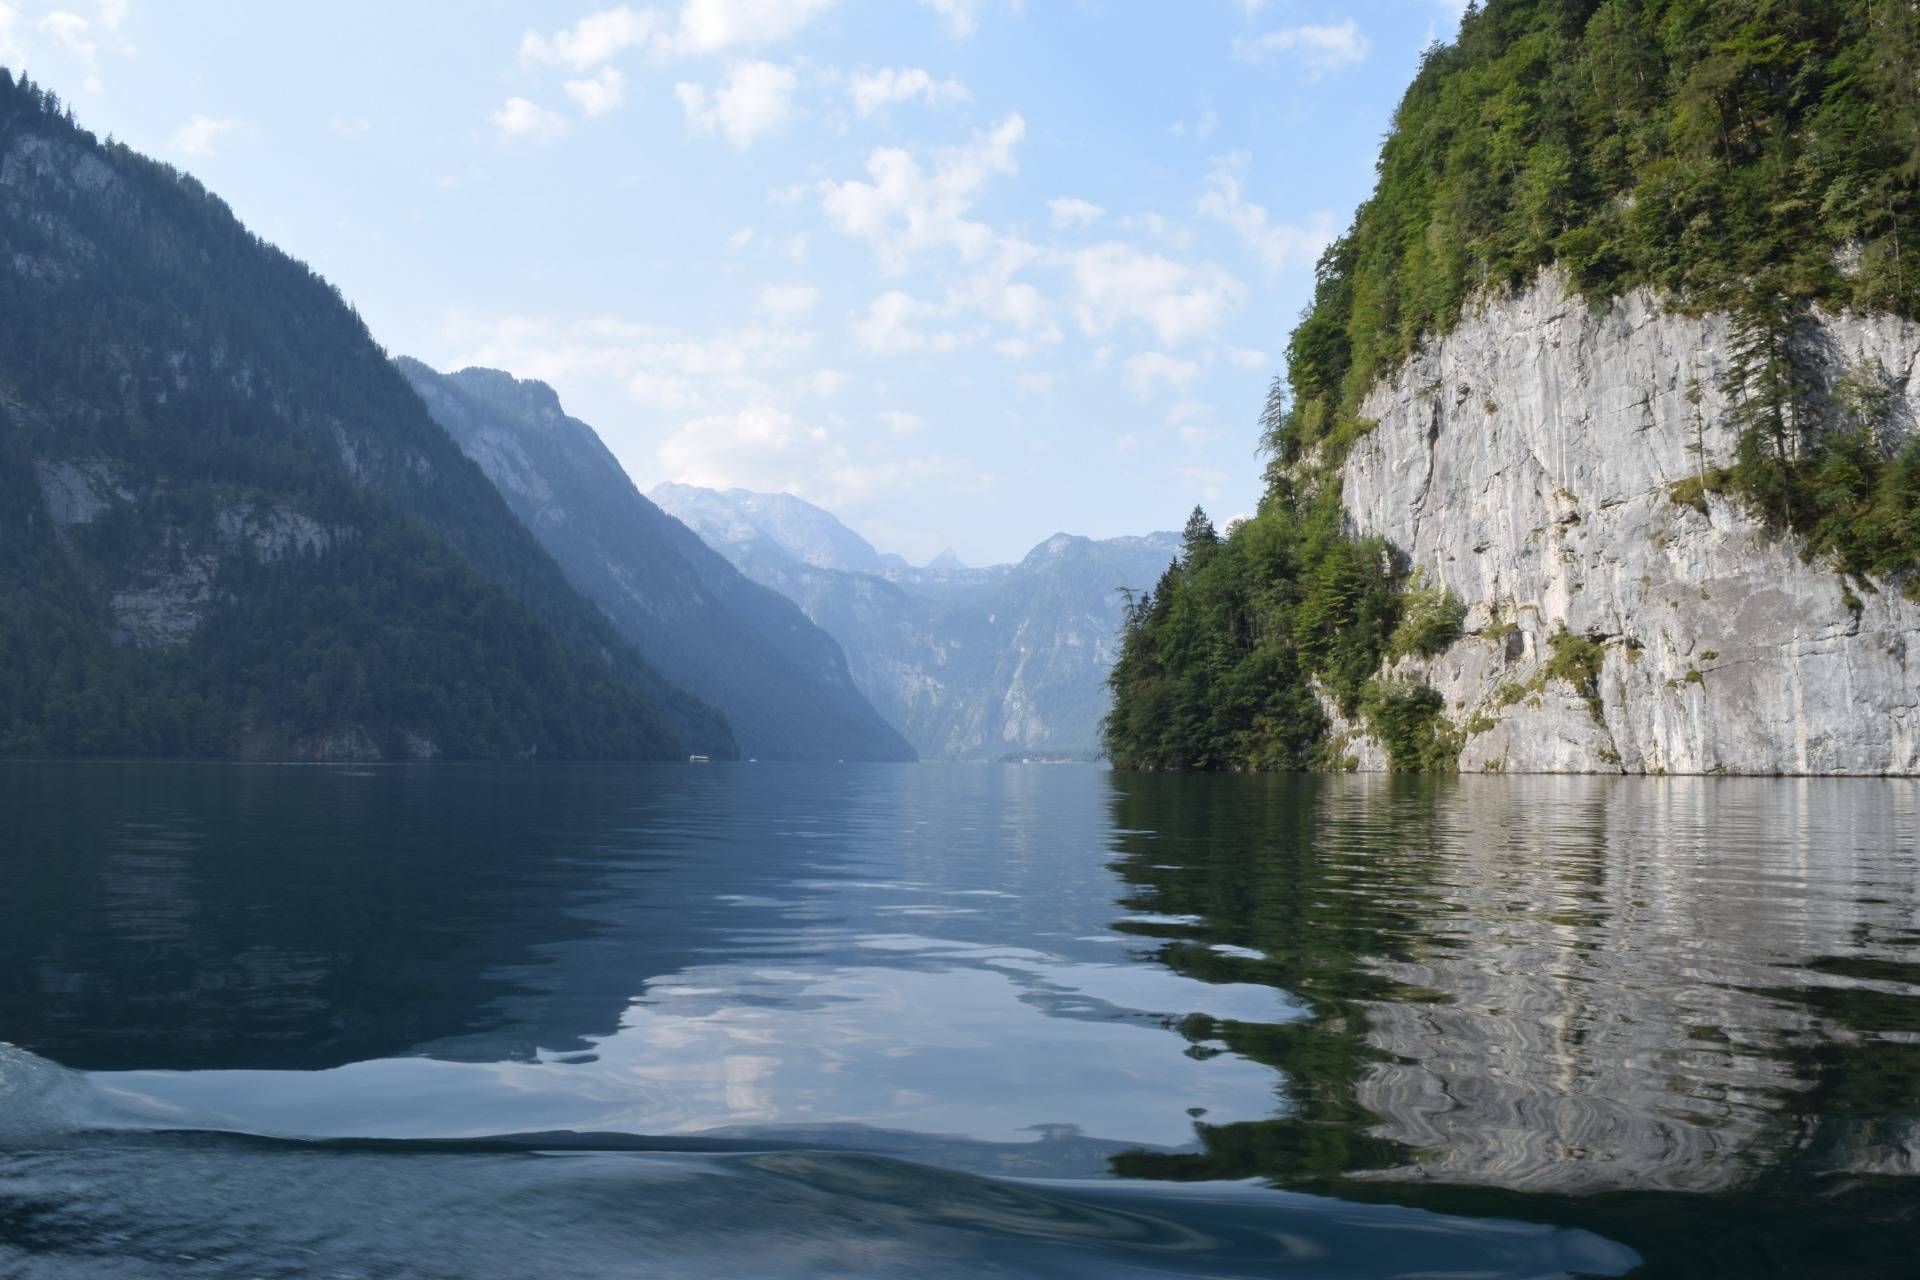 Views from the ferry to lake Obersee